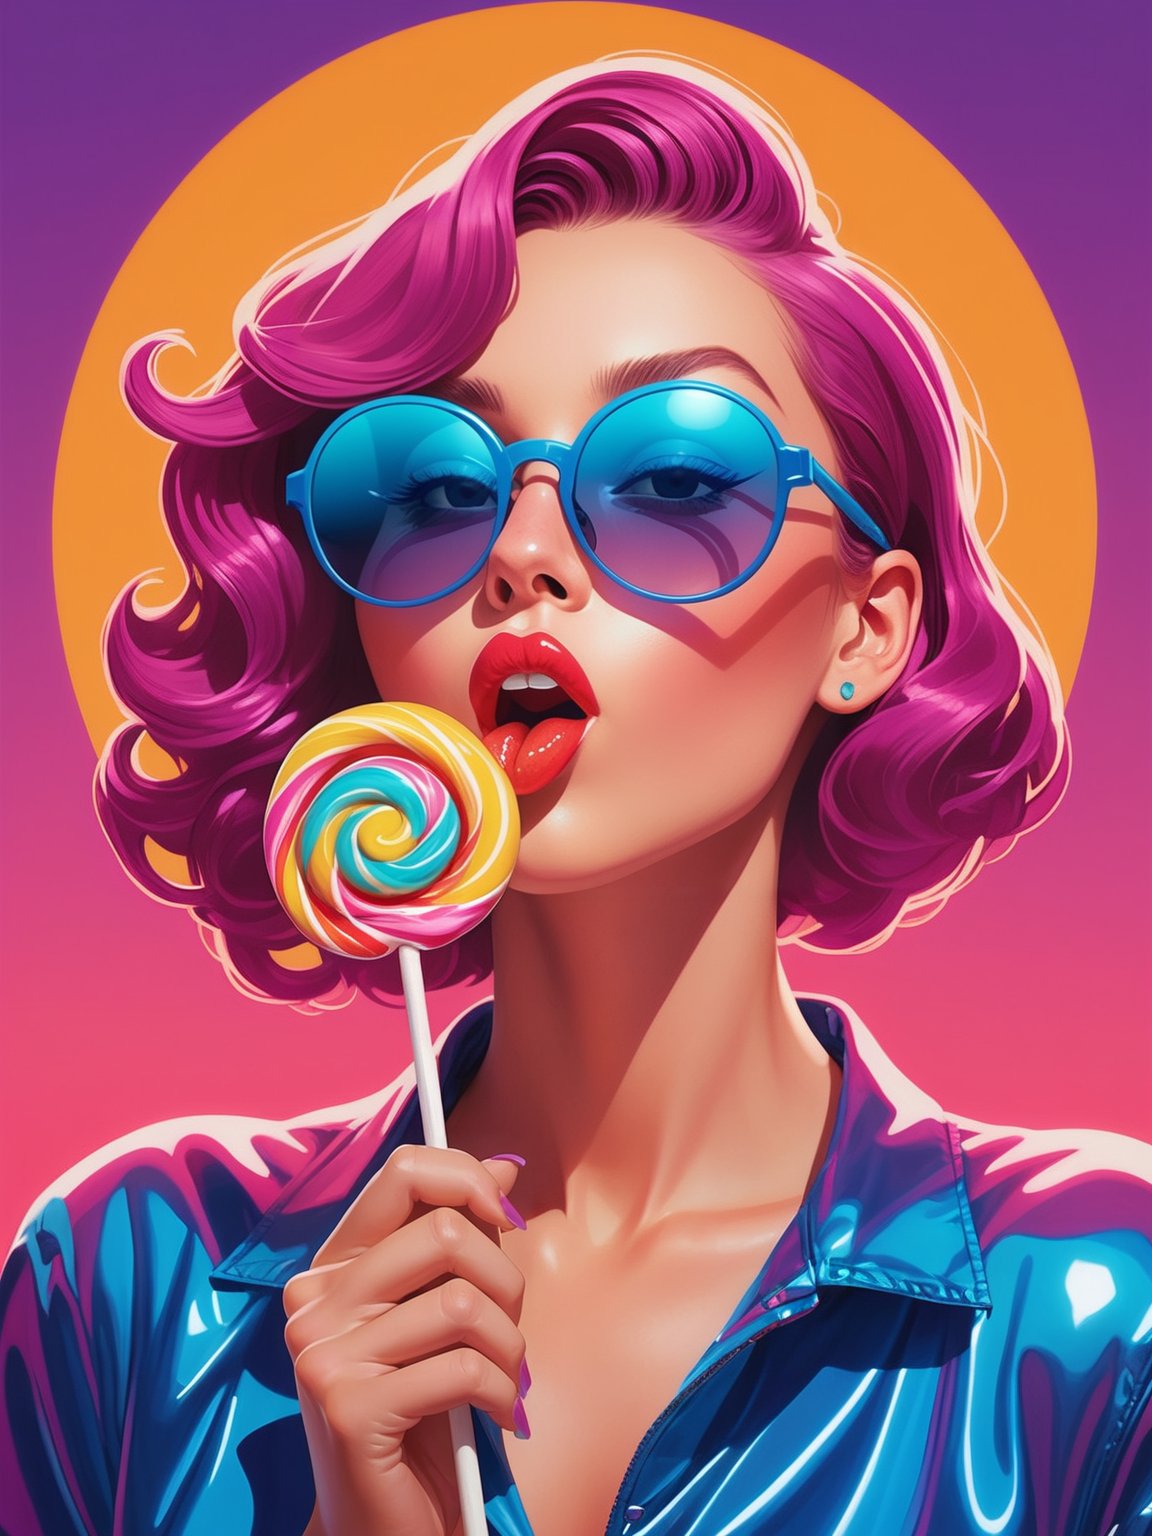 high quality illustration of a cocky confident woman, licking large transparent lollipop,  vibrant neon colors, cool sunglasses, silhouette, illustration, looking at viewer, lofi,